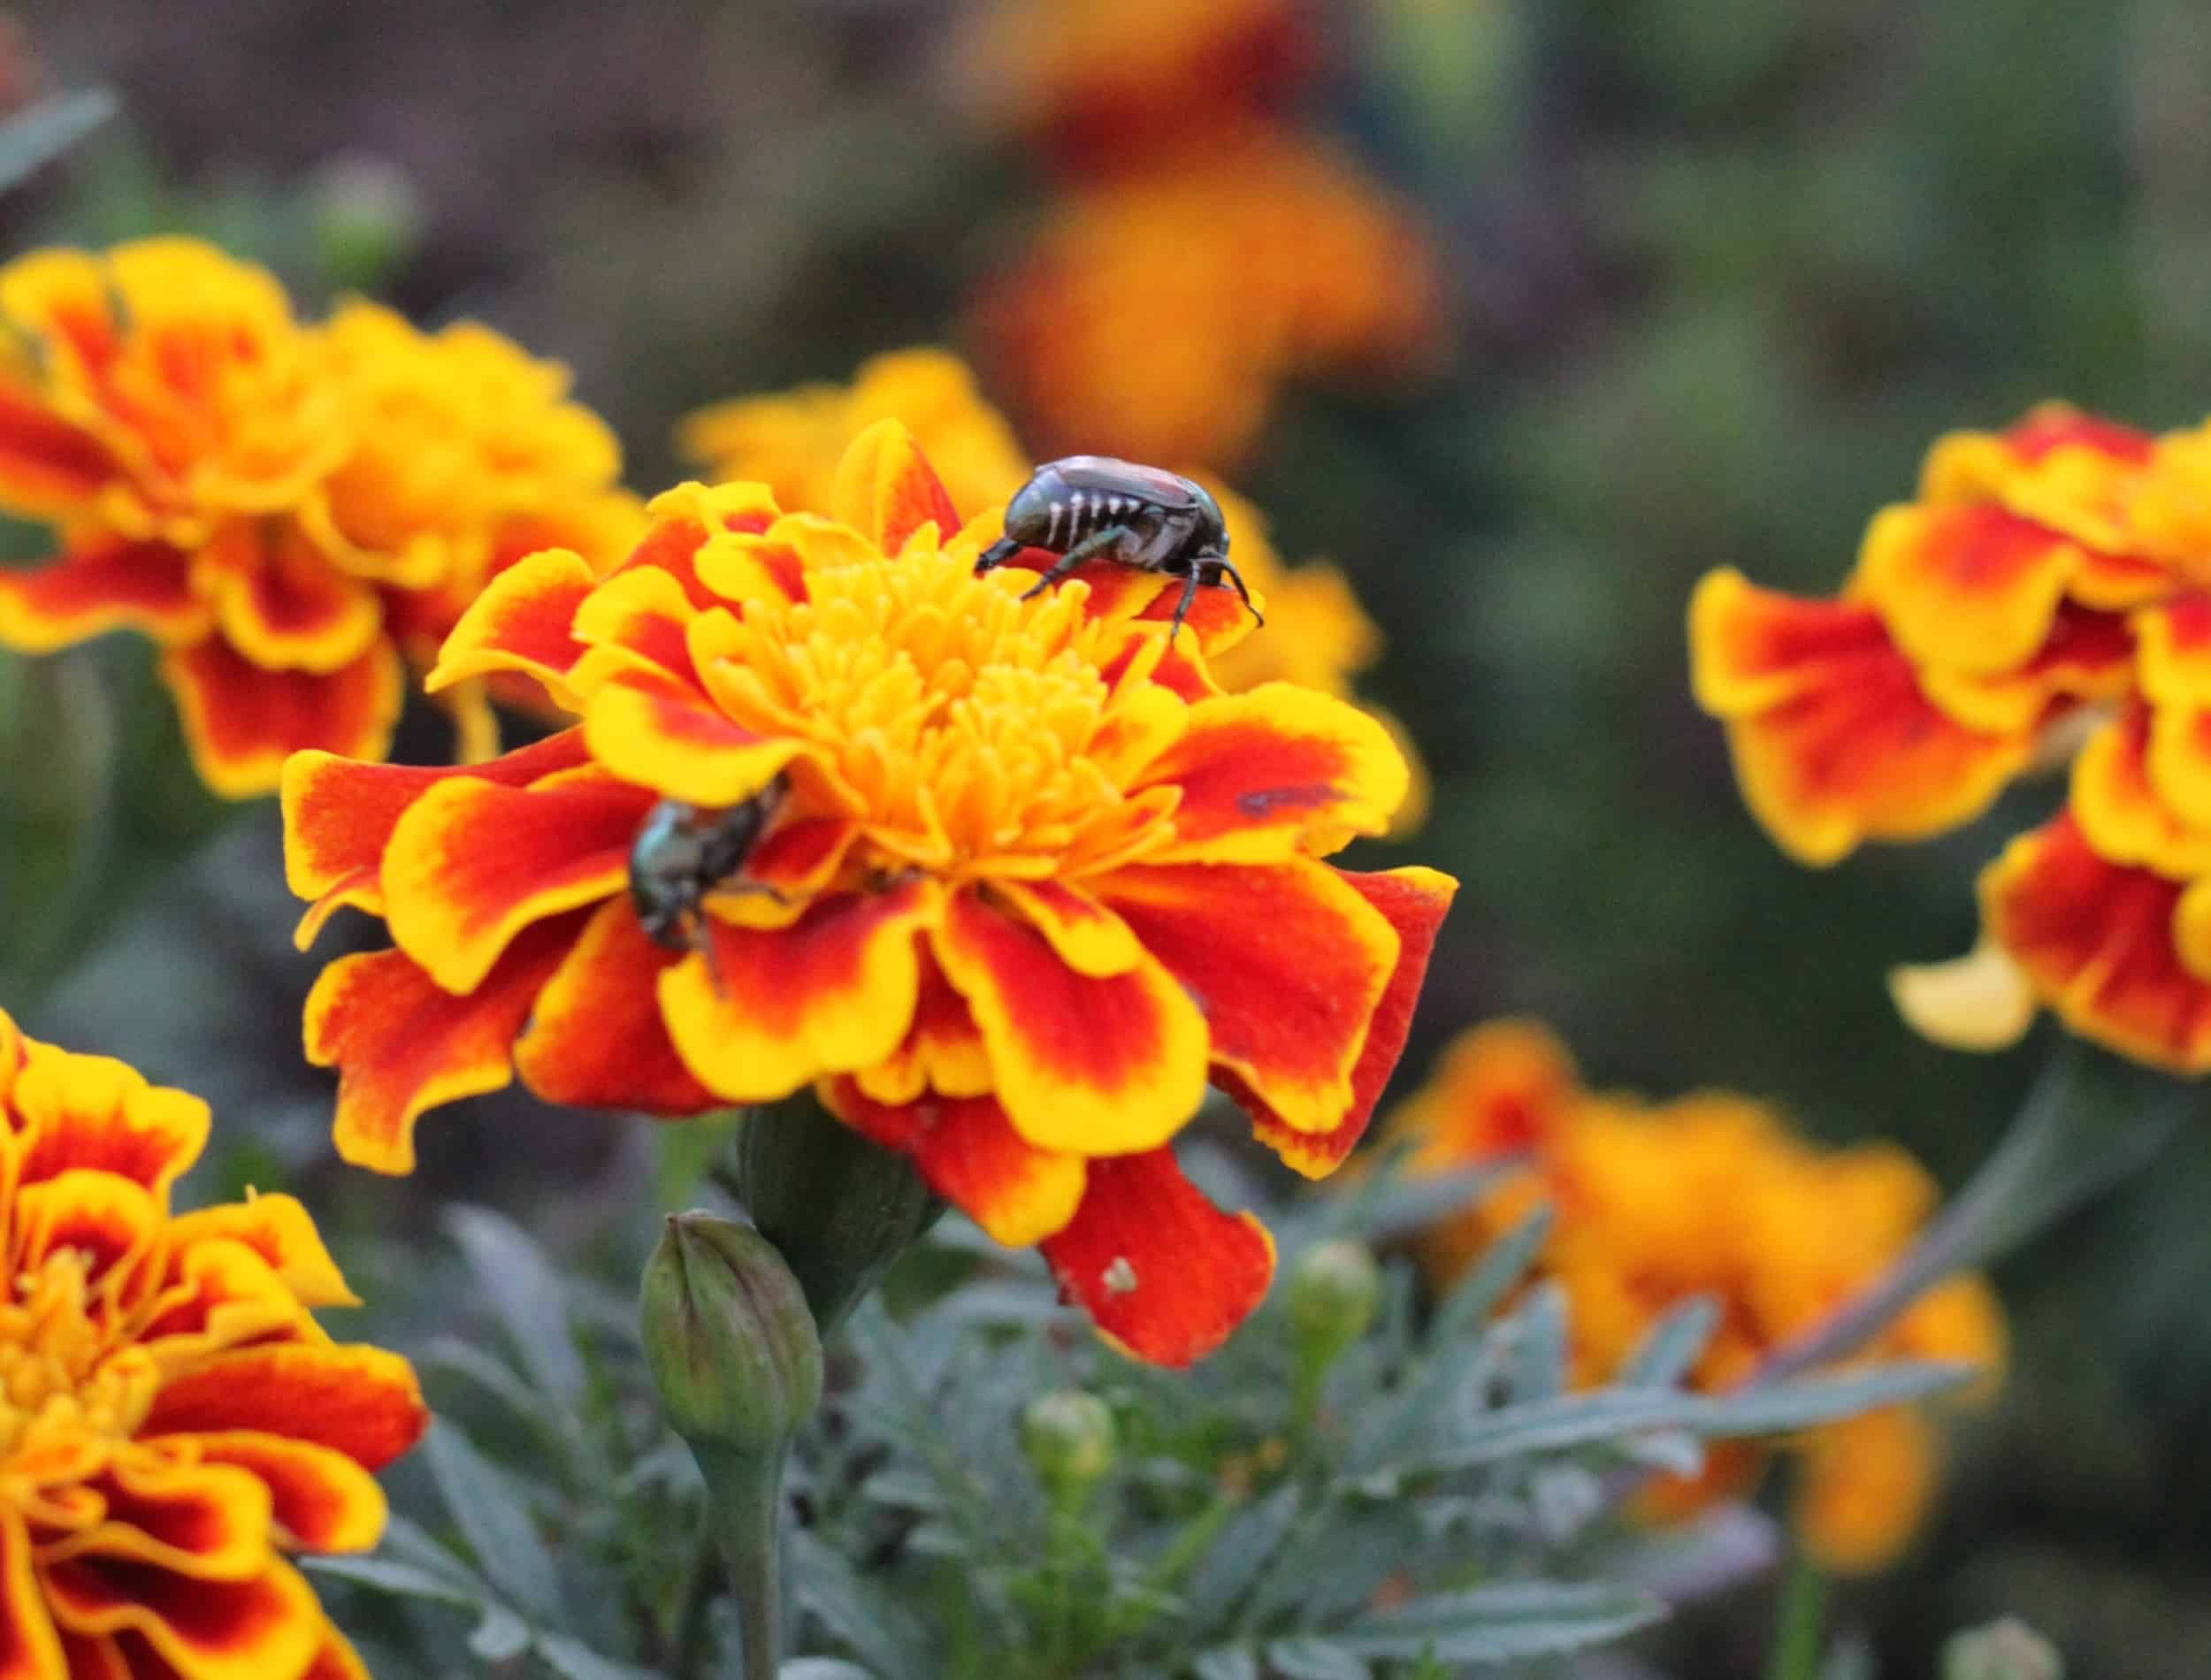 A multicolor scarab beetle on orange and red marigolds. 3092